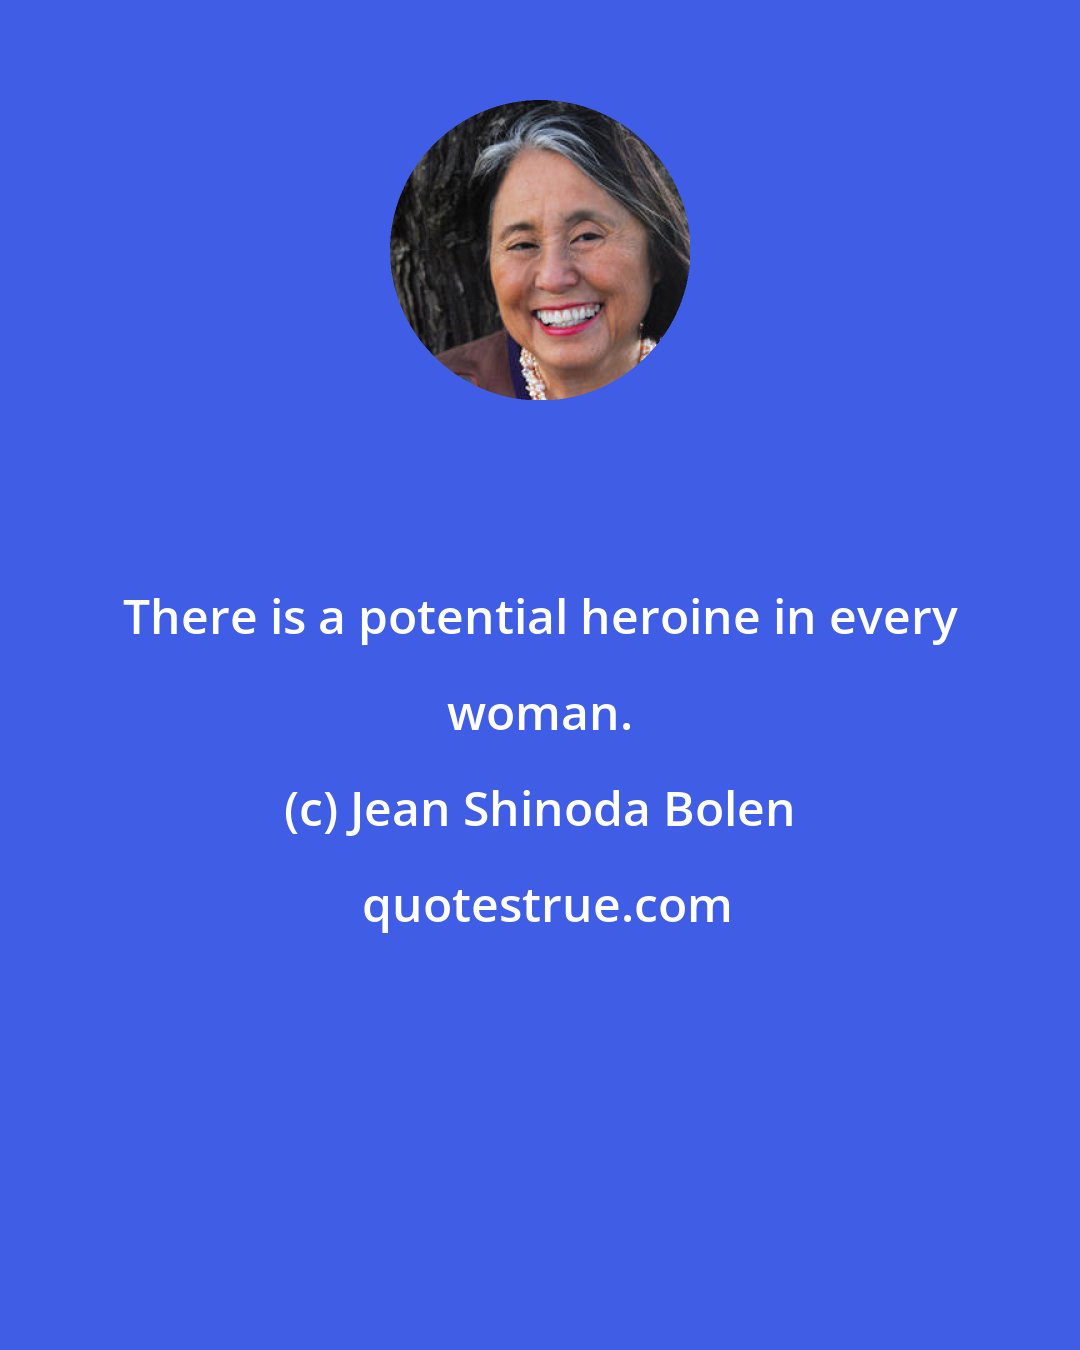 Jean Shinoda Bolen: There is a potential heroine in every woman.